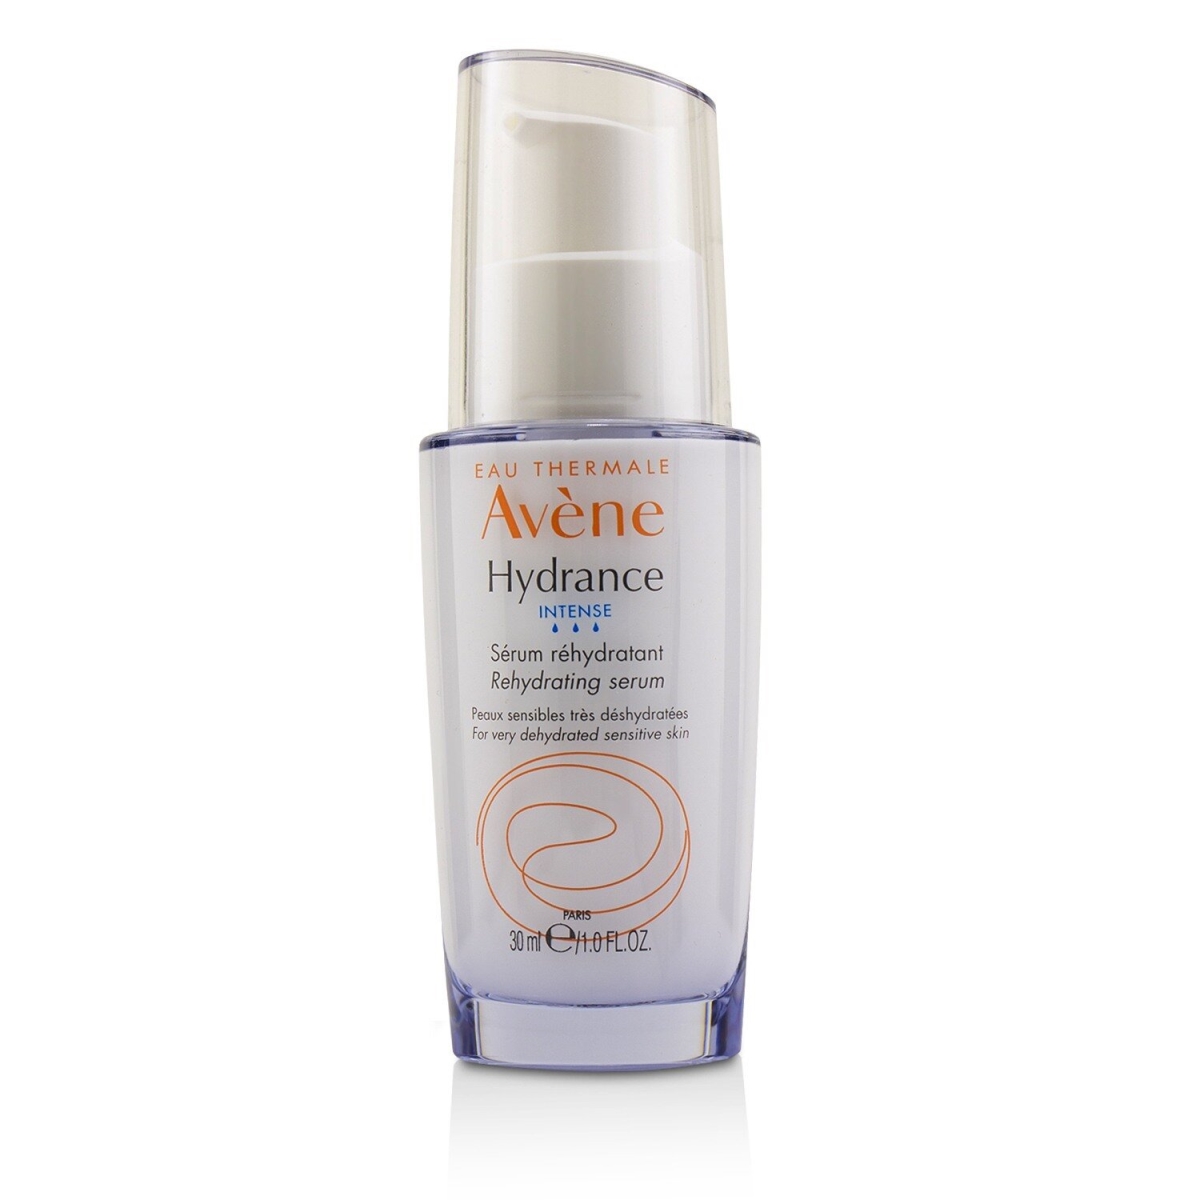 Picture of Avene 220273 1 oz Hydrance Intense Rehydrating Serum for Very Dehydrated Sensitive Skin